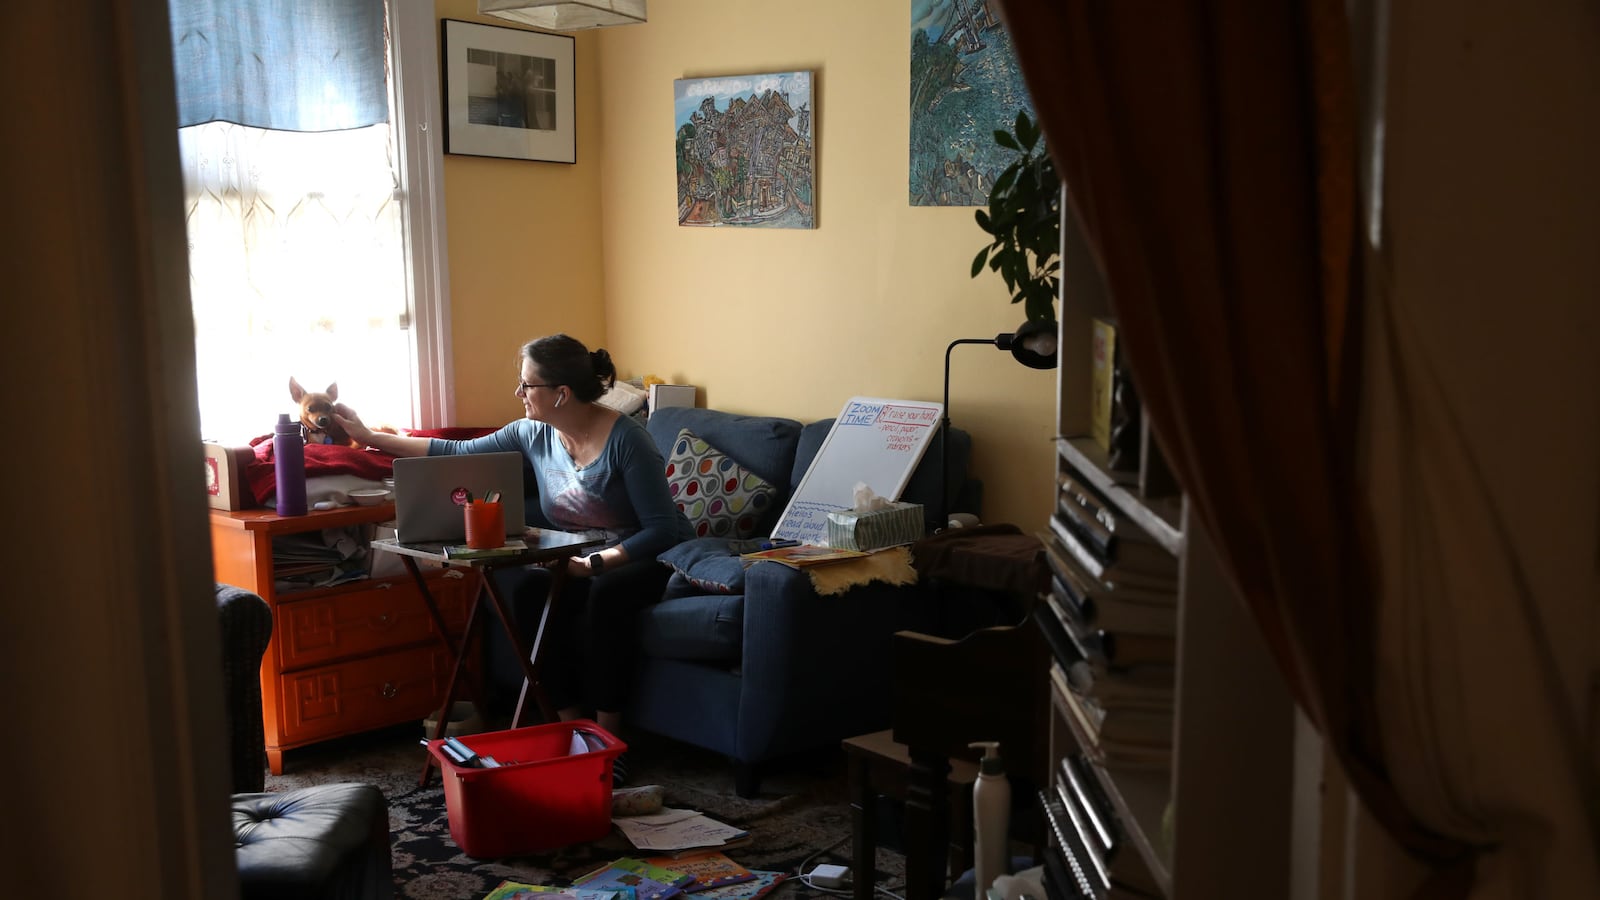 Leanne Francis, first grade teacher at Harvey Milk Civil Rights Academy, conducts an online class from her living room in San Francisco, California. With schools closed across the United States due to the COVID19 pandemic, teachers are holding some classes for students online.